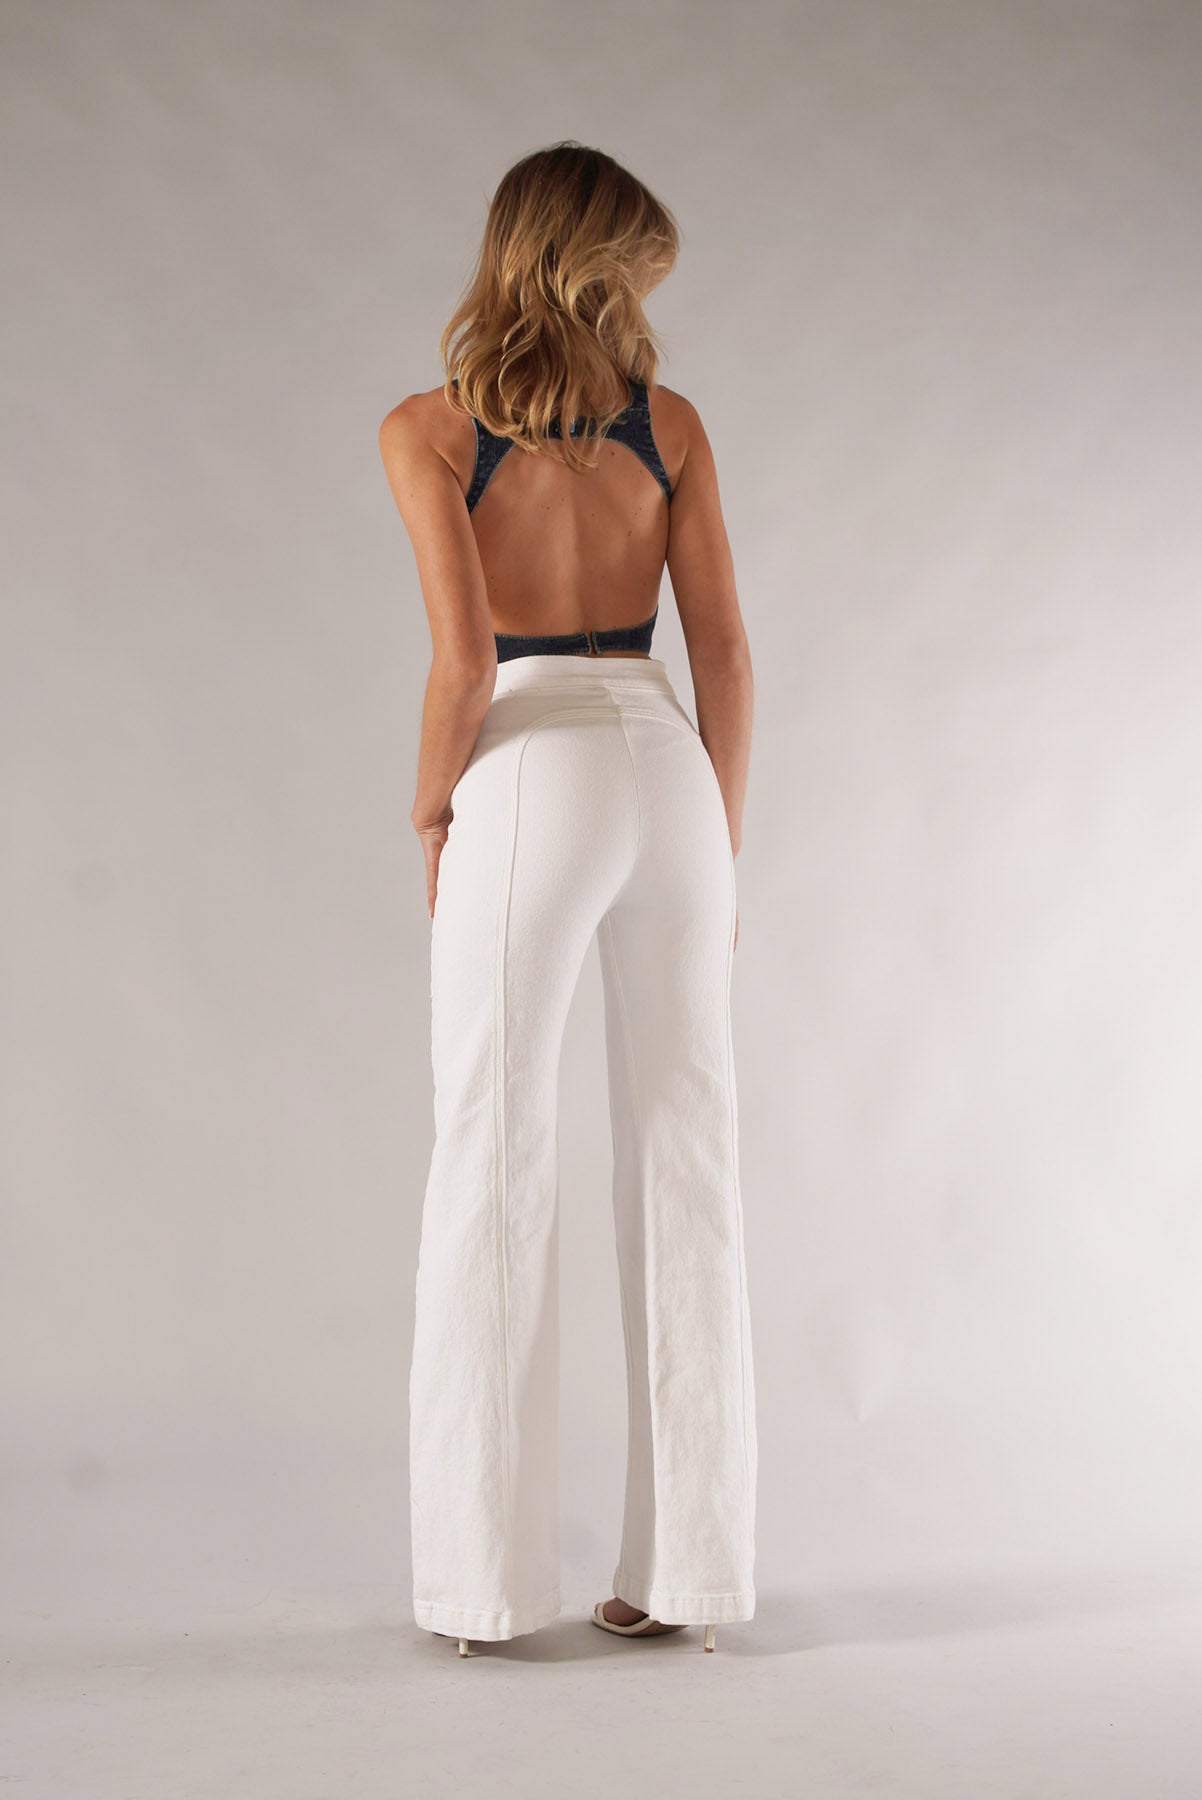 Rollergirl Flares / Optical White